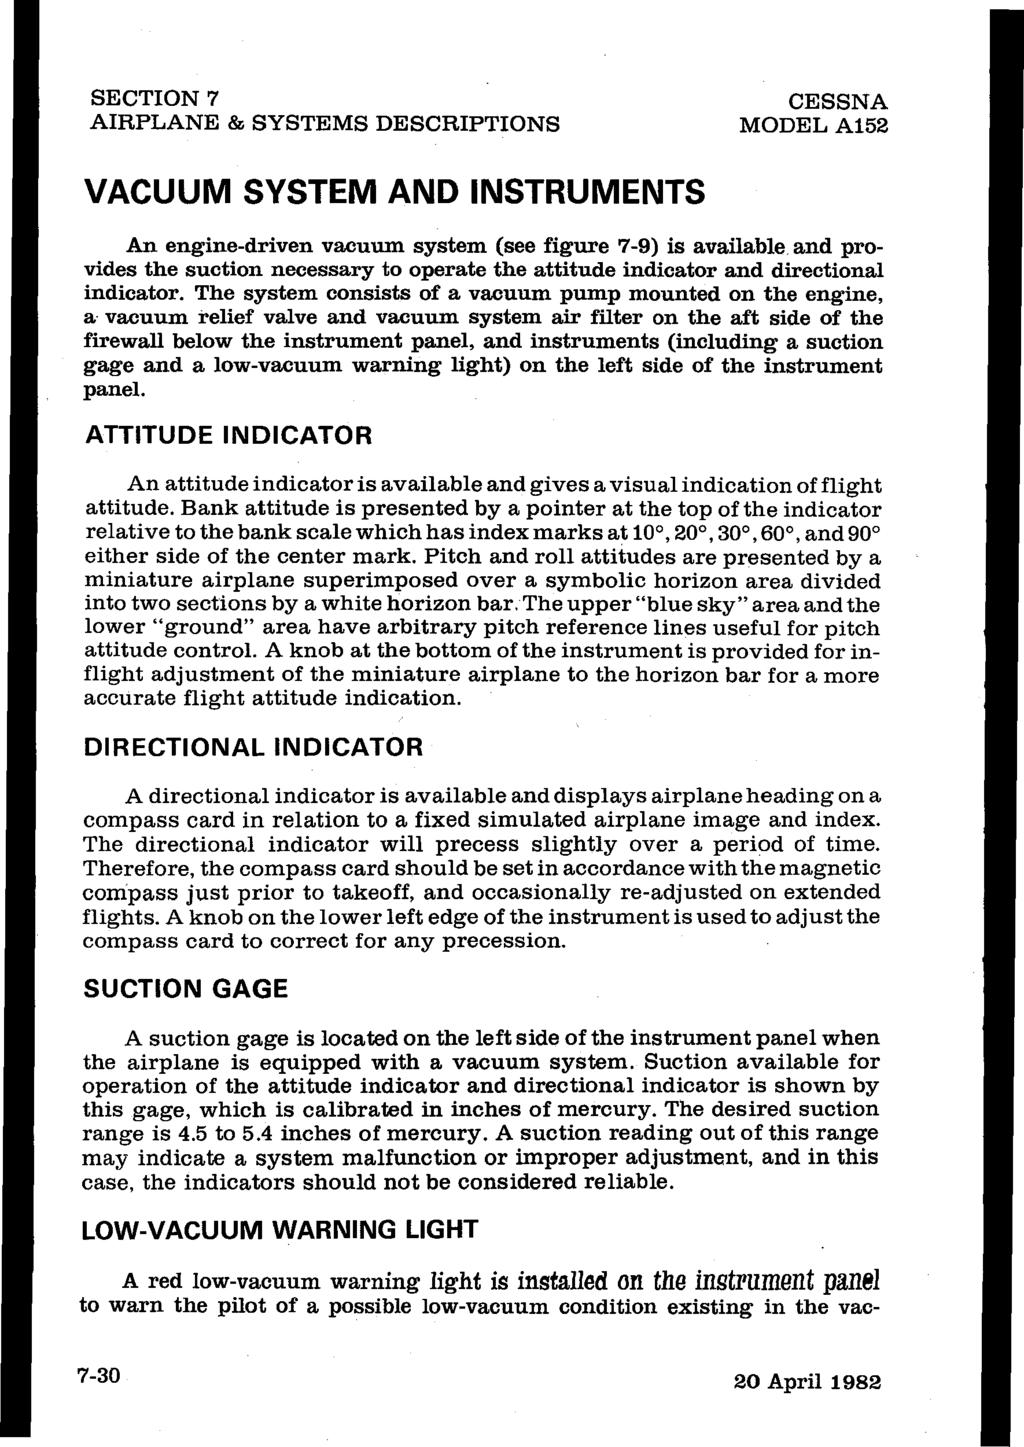 SECTION 7 AIRPLANE & SYSTEMS DESCRIPTIONS CESSNA MODEL A152 VACUUM SYSTEM AND INSTRUMENTS An engine-driven vacuum system (see figure 7-9) is available.